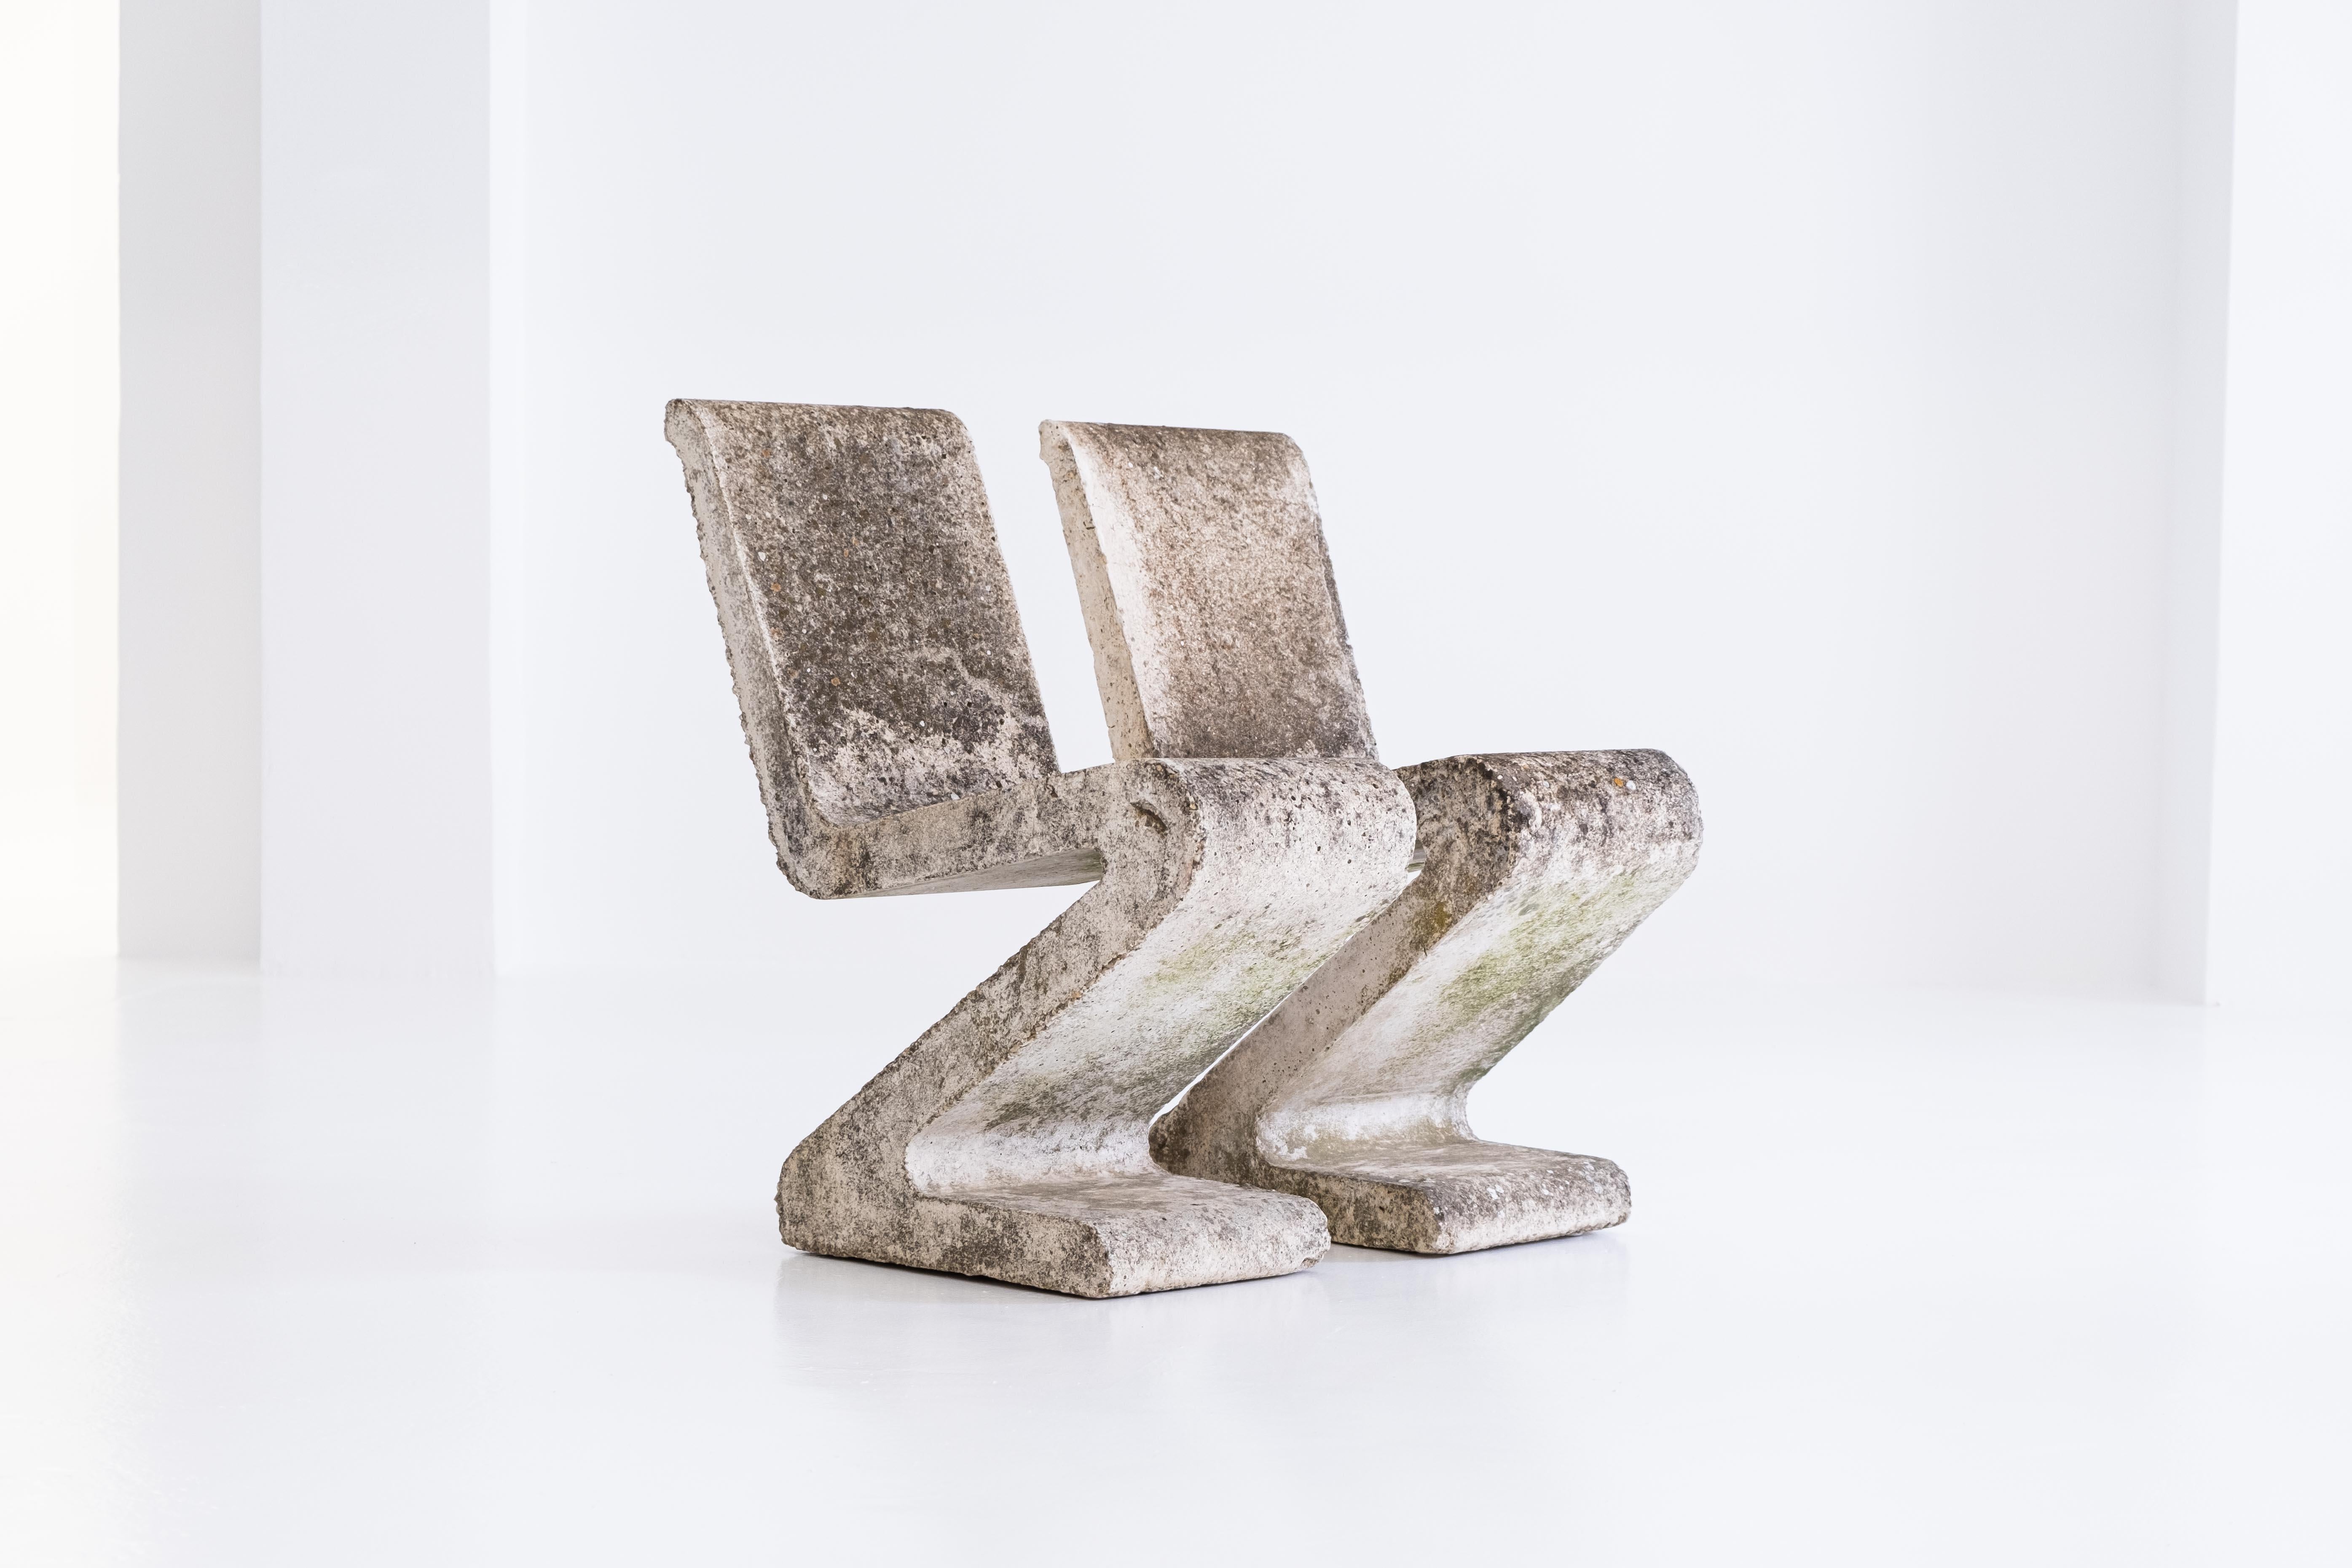 A very rare pair fo concrete garden chairs with beautiful patina. Reminding of the famous Rietveld ‚Zig Zag chair‘, the construction is completely industrial: steel-reinforced concrete. This internal steel skeleton gives the chair absolute stability